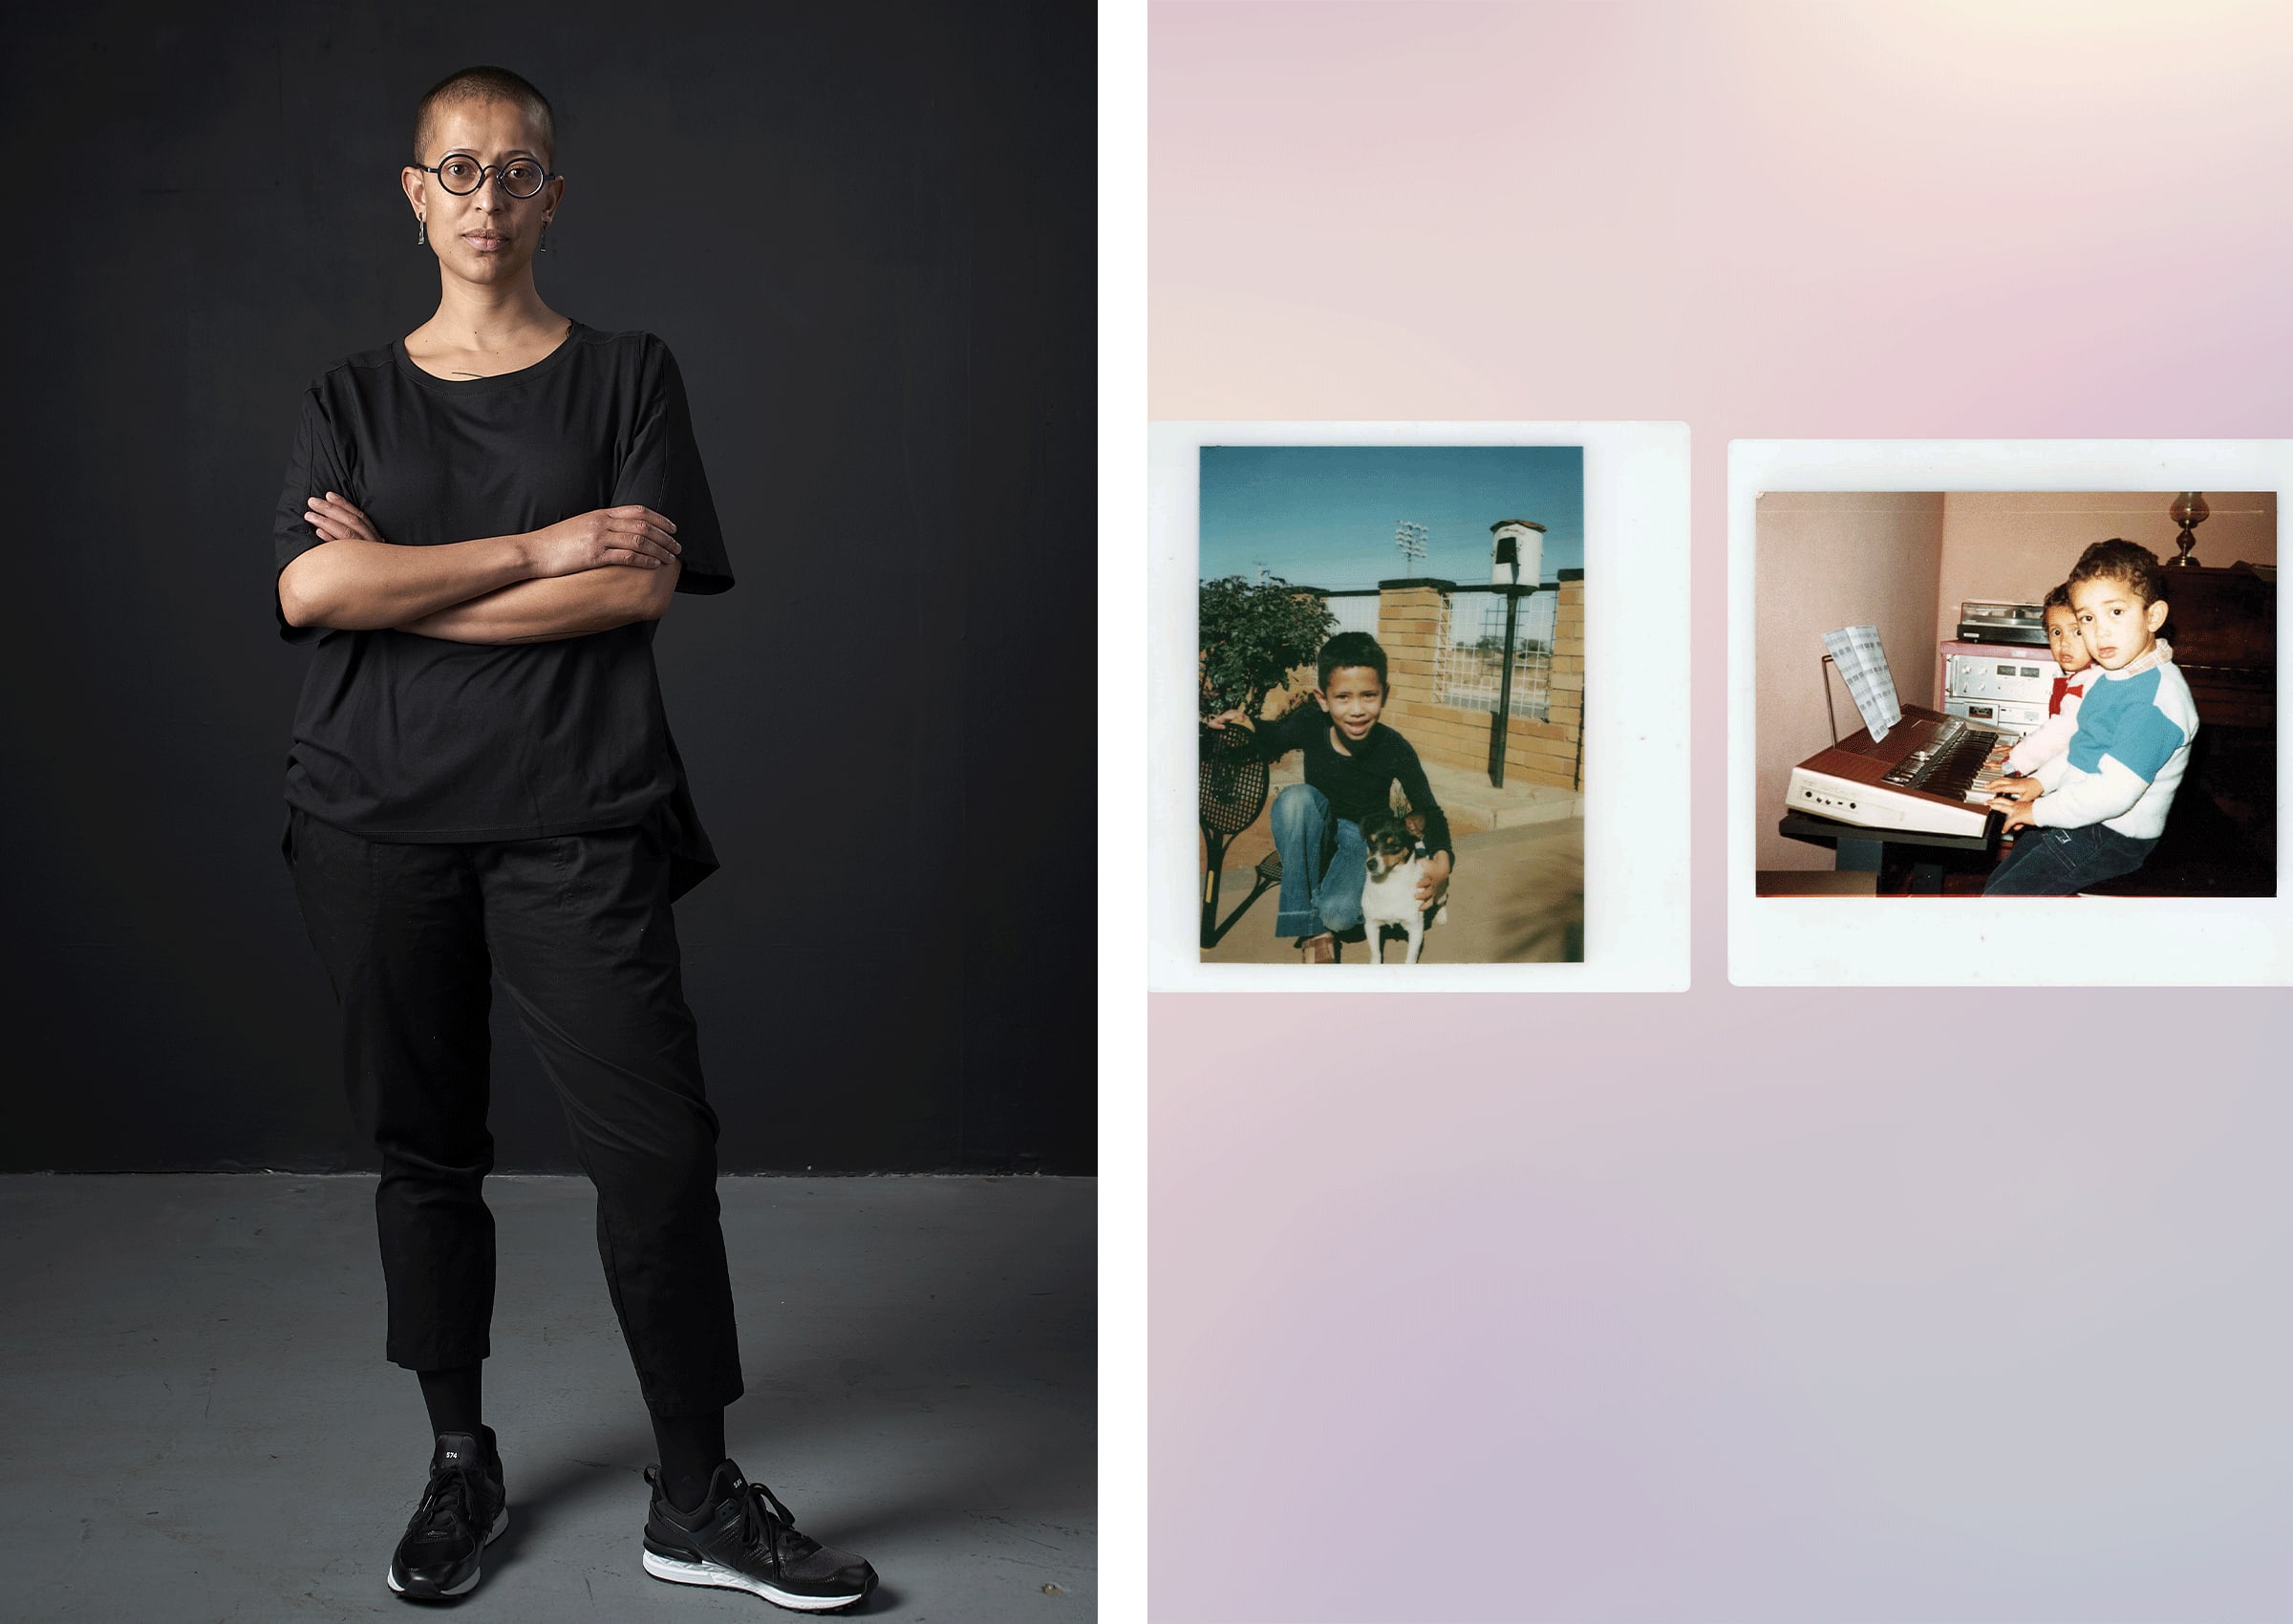 Left: Gabrielle Goliath. Photograph by Anthea Pockroy. Right: Gabrielle Goliath, These three remain (concept image), 2023. Commissioned and supported by Sharjah Art Foundation; Goodman Gallery, Cape Town, Johannesburg and London; and Galleria Raffaella Cortese (Milan). Courtesy of the artist.